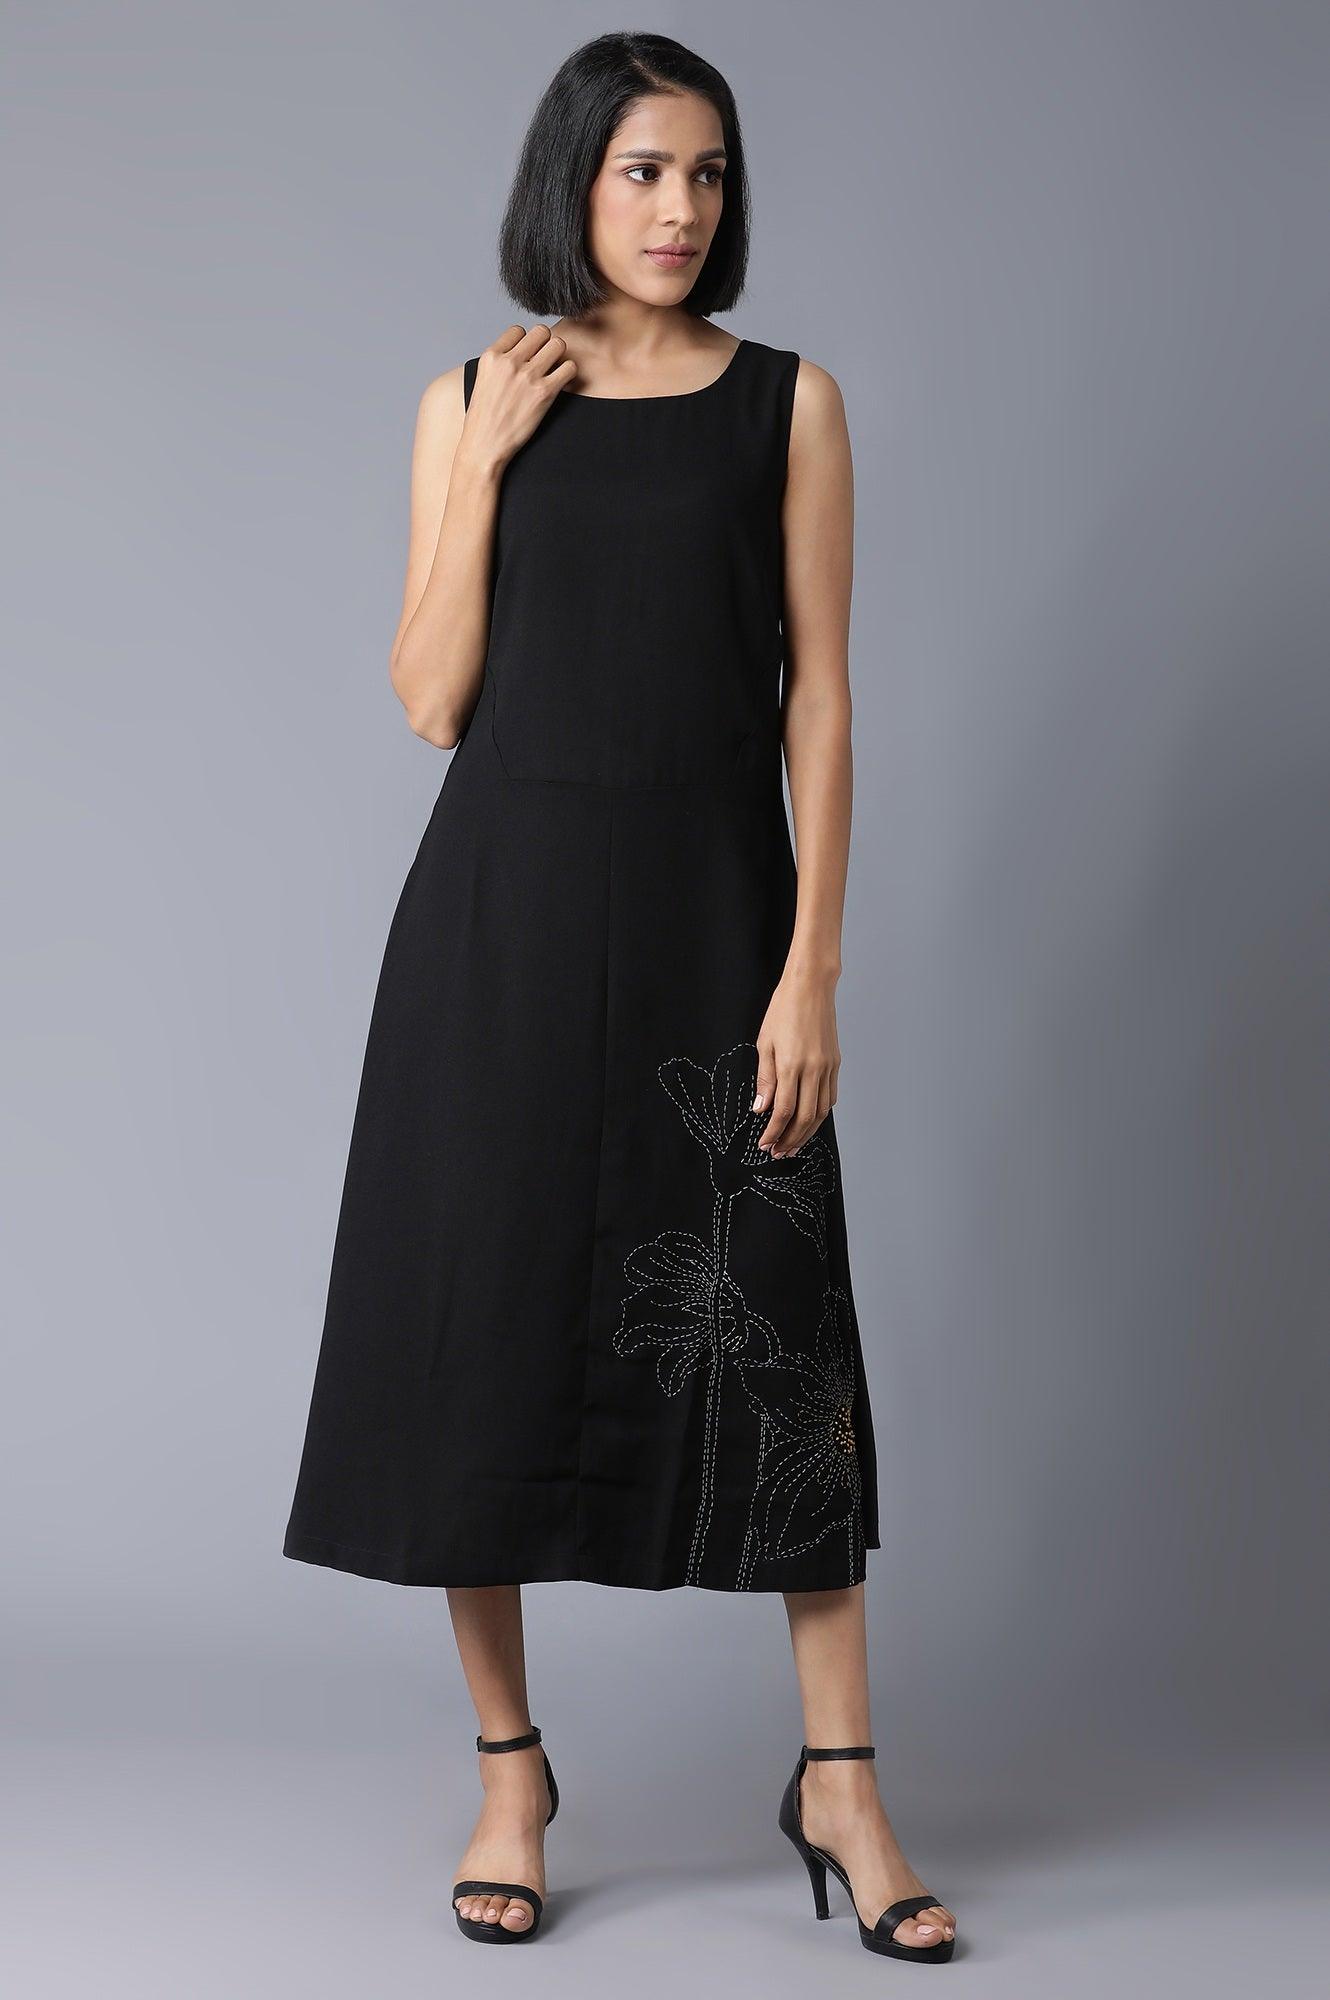 Black Sleeveless Embroidered Dress In Round Neck - wforwoman